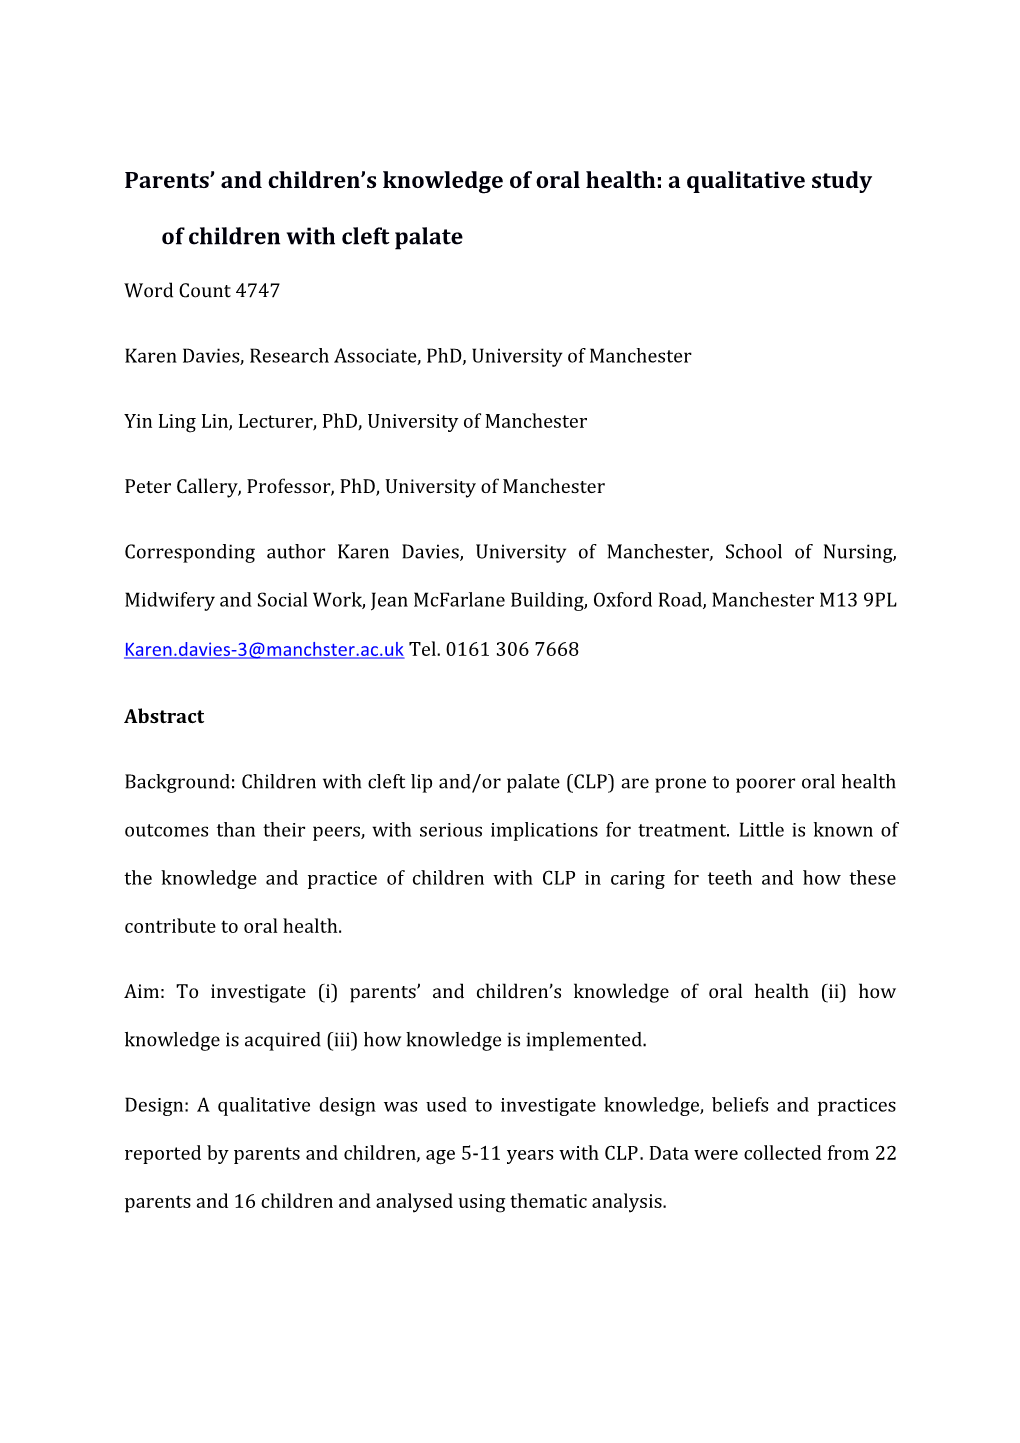 Parents and Children S Knowledge of Oral Health: a Qualitative Study of Children with Cleft